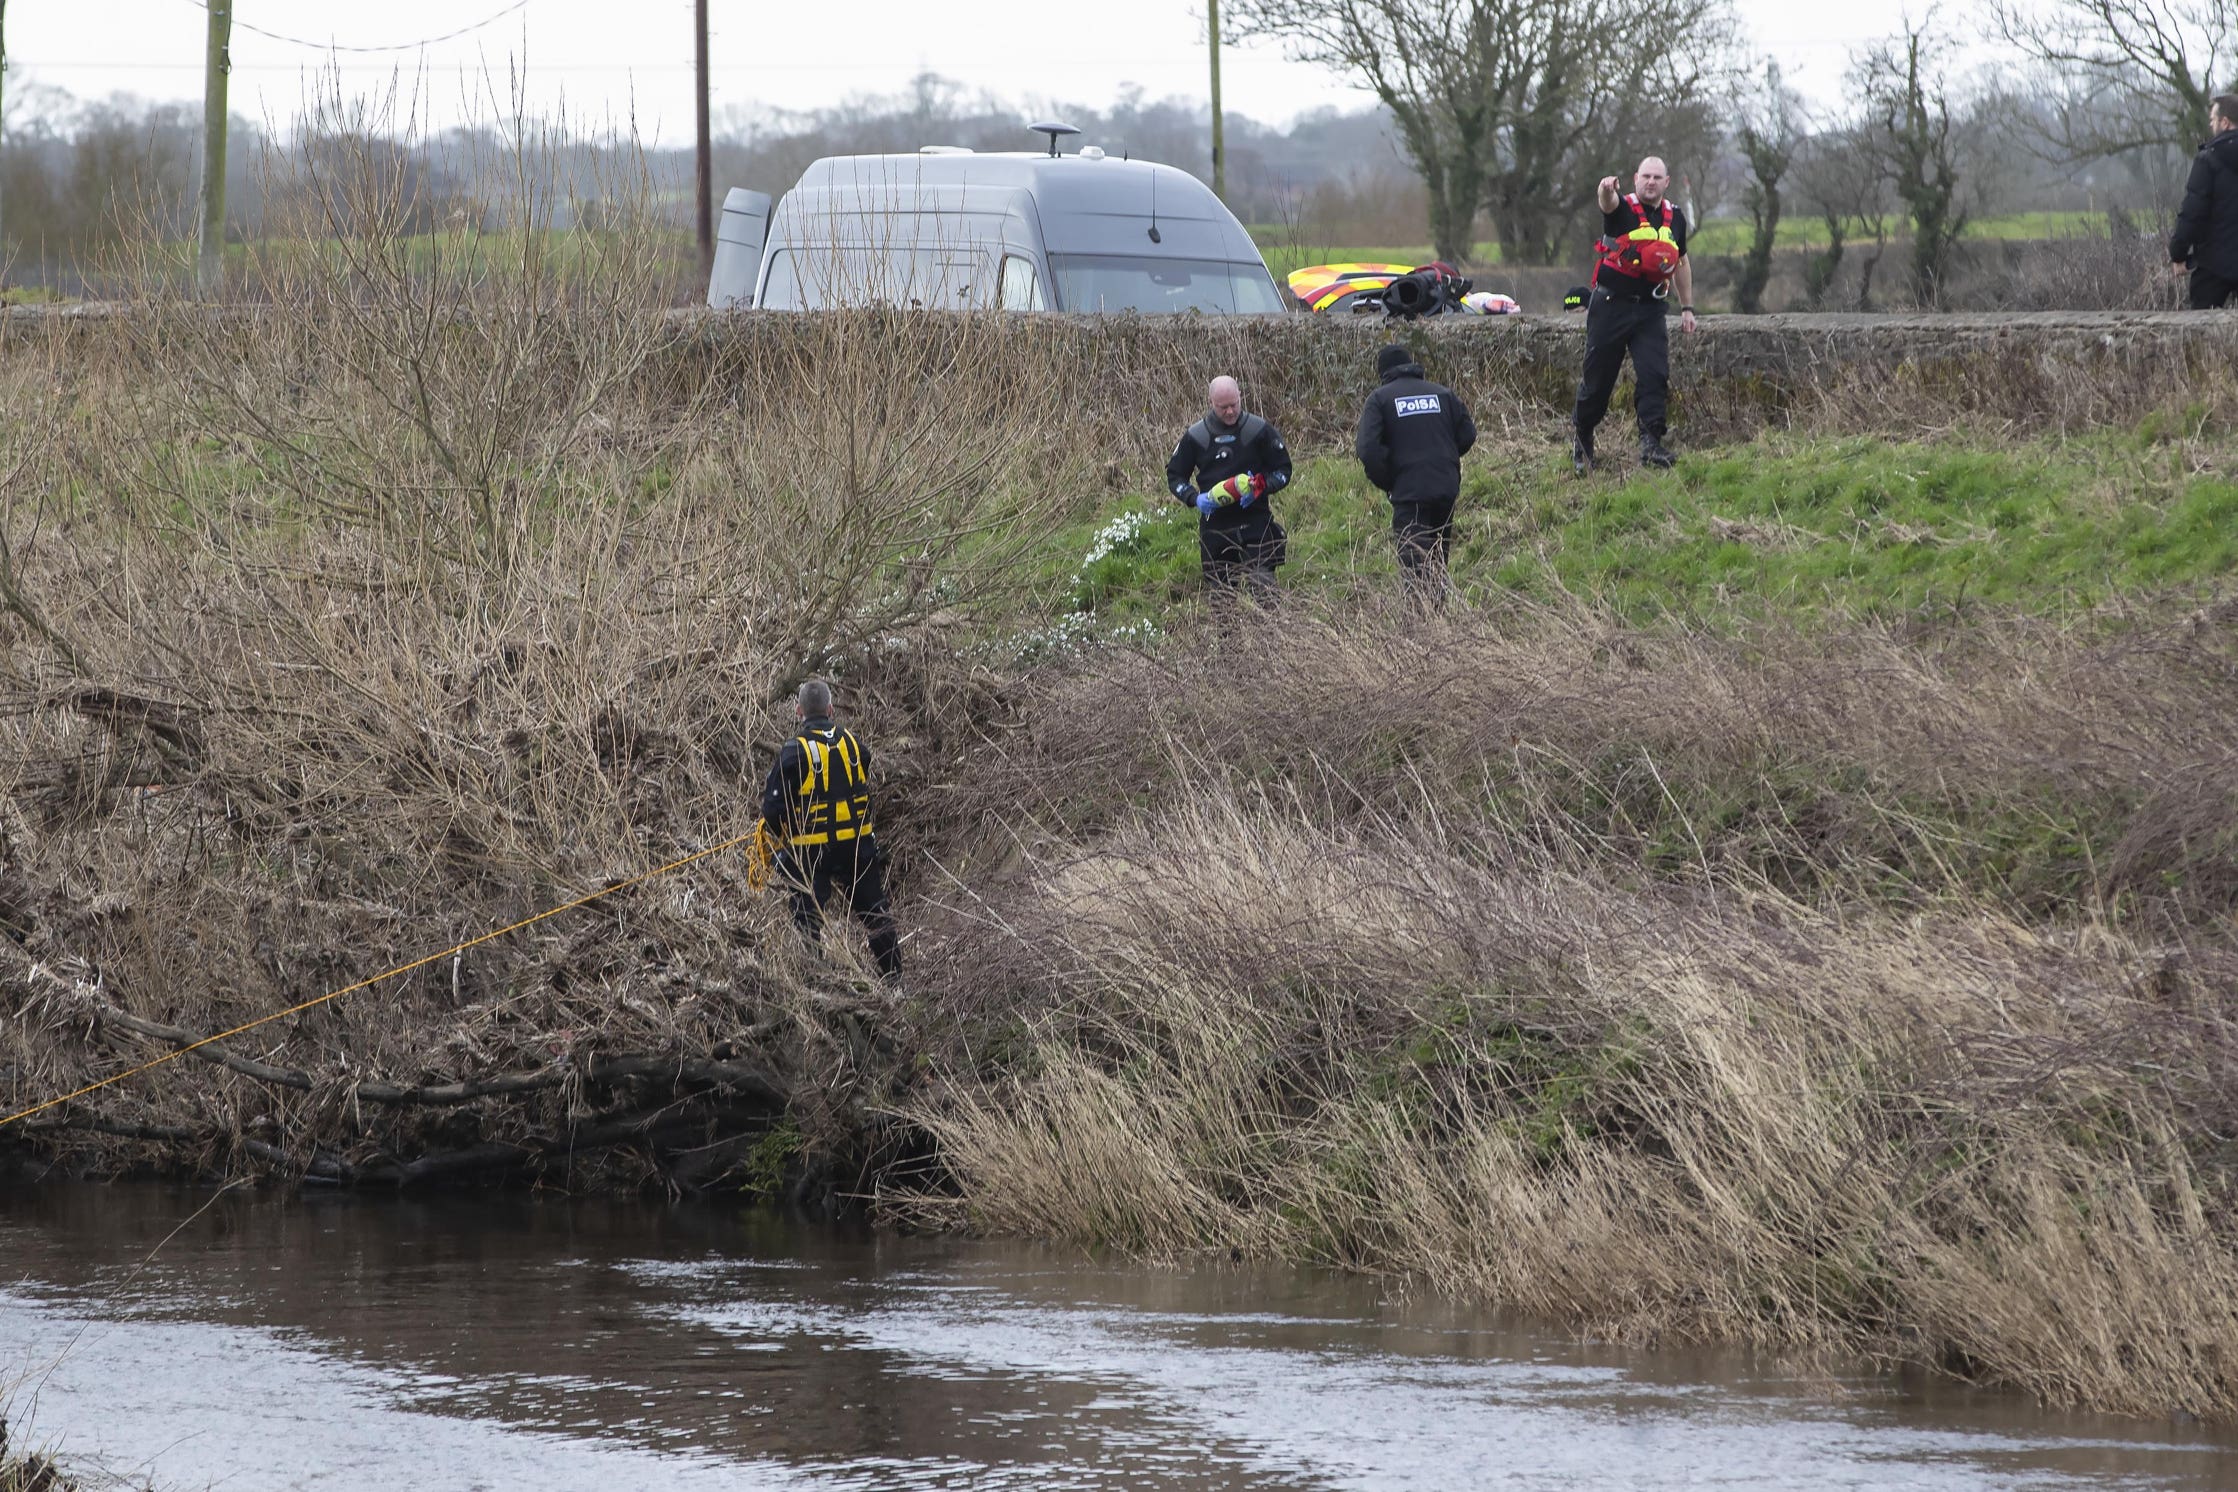 Ms Bulley’s body was discovered in reeds at the edge of the River Wyre